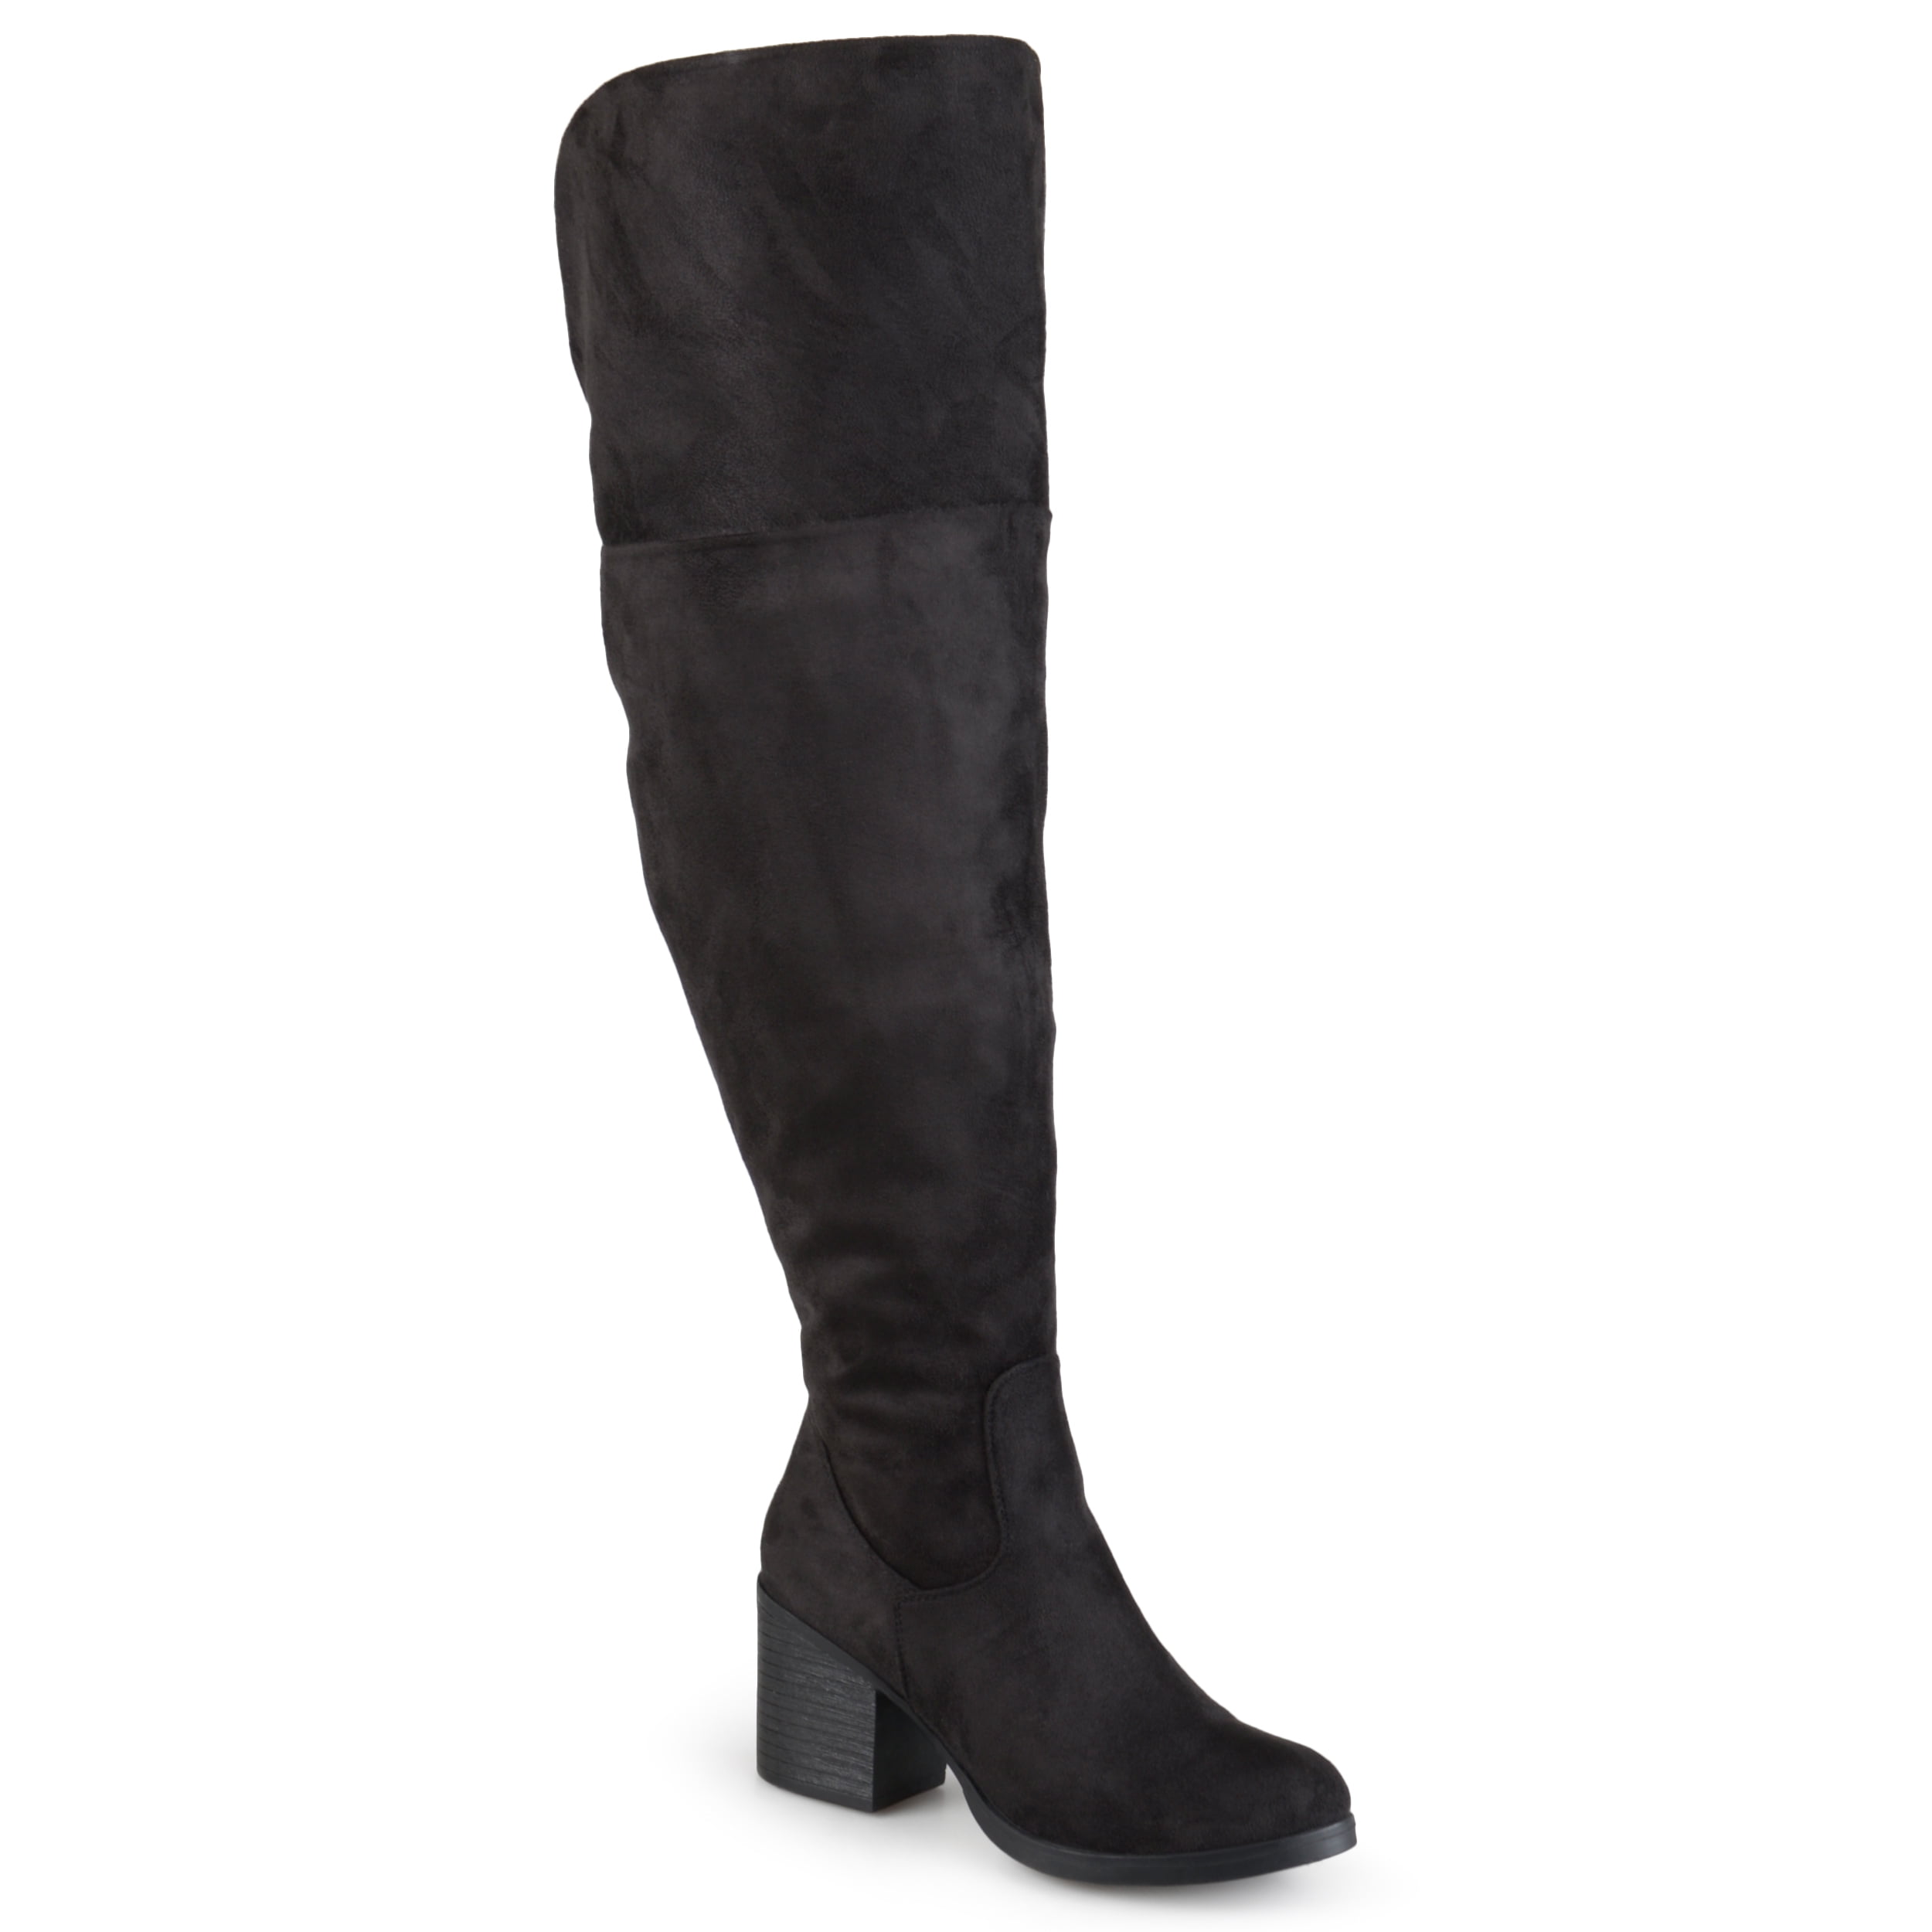 Women's Round Toe Faux Suede Tall Wide Calf Boots - Walmart.com